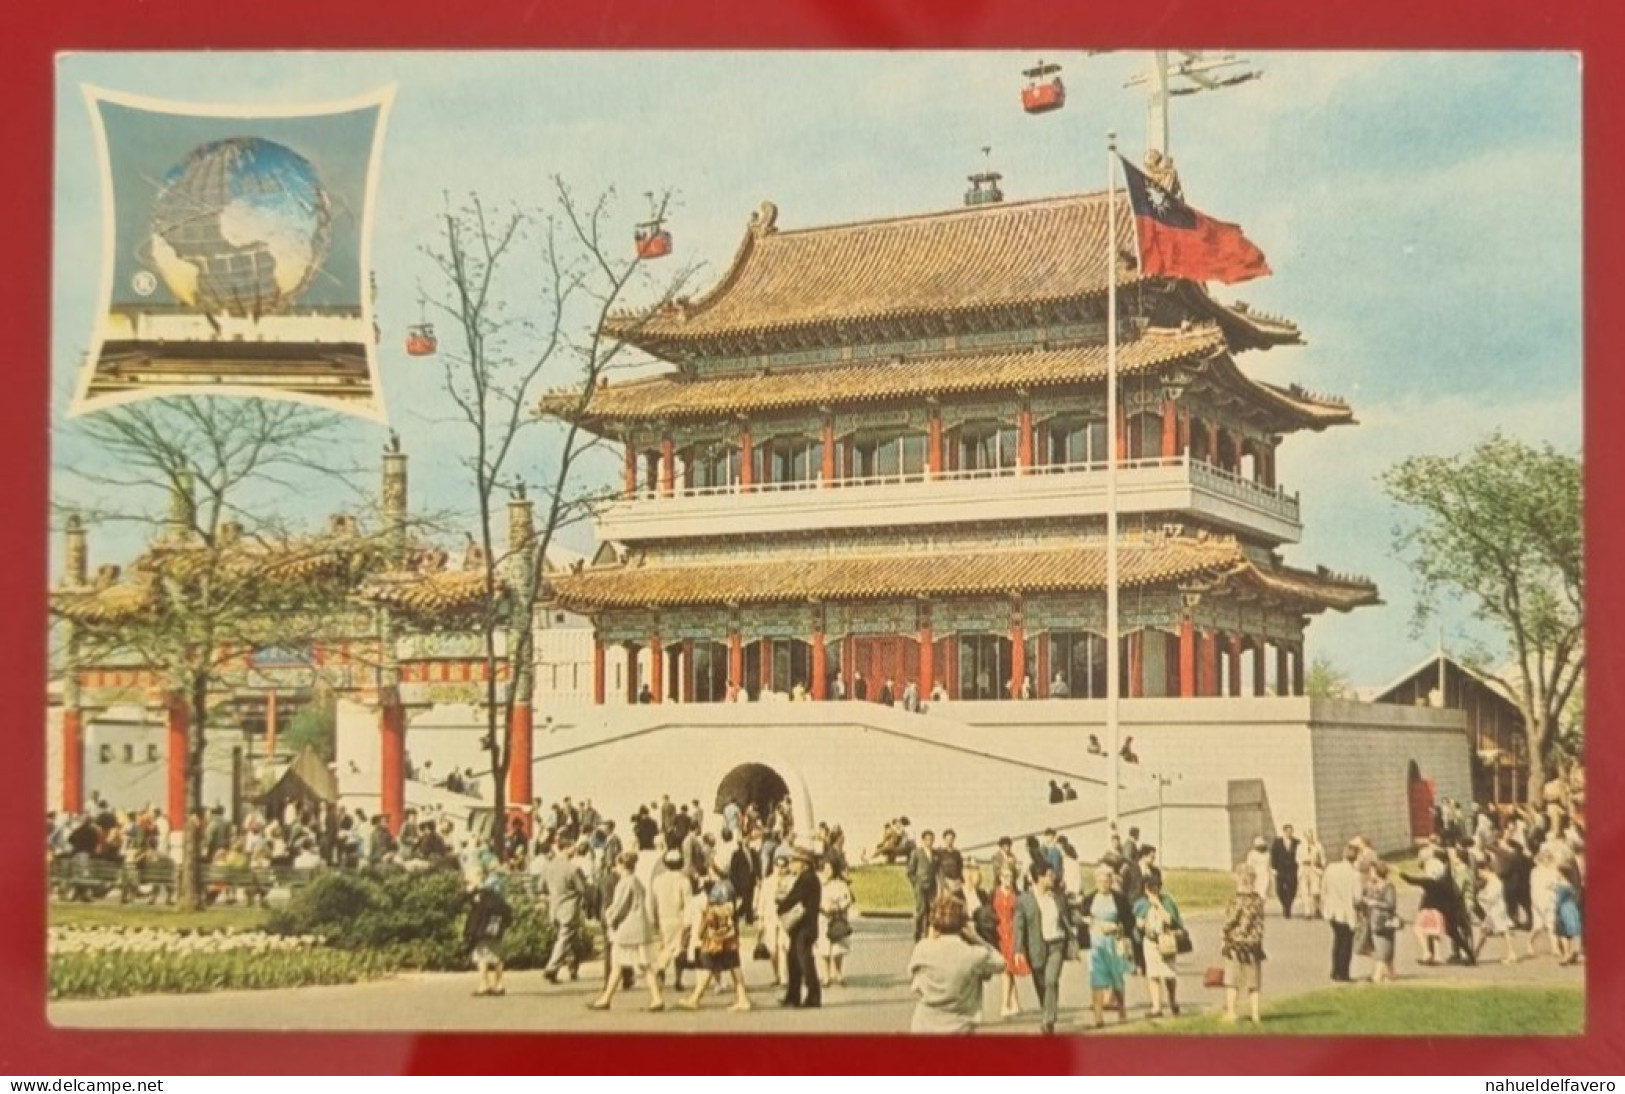 Uncirculated Postcard - USA - NY, NEW YORK WORLD'S FAIR 1964-65 - REPUBLICOF CHINA PAVILION - Expositions